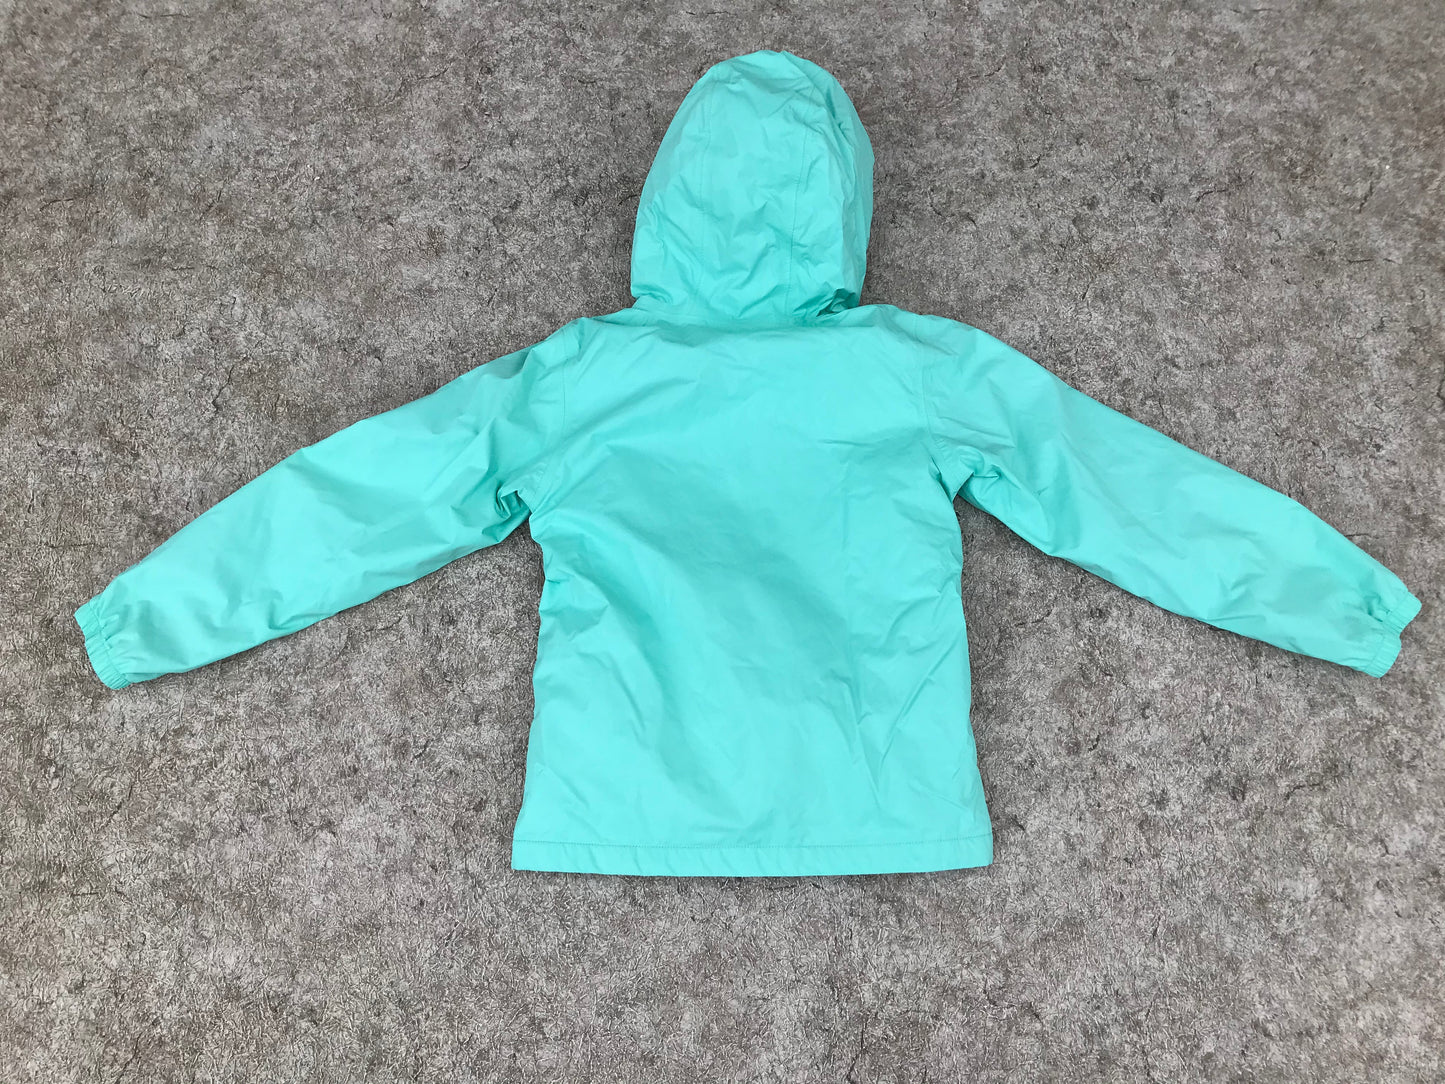 Light Coat Child Size 10-12 The North Face Rain and Wind Mint with Grey Micro Fleece Lined Excellent